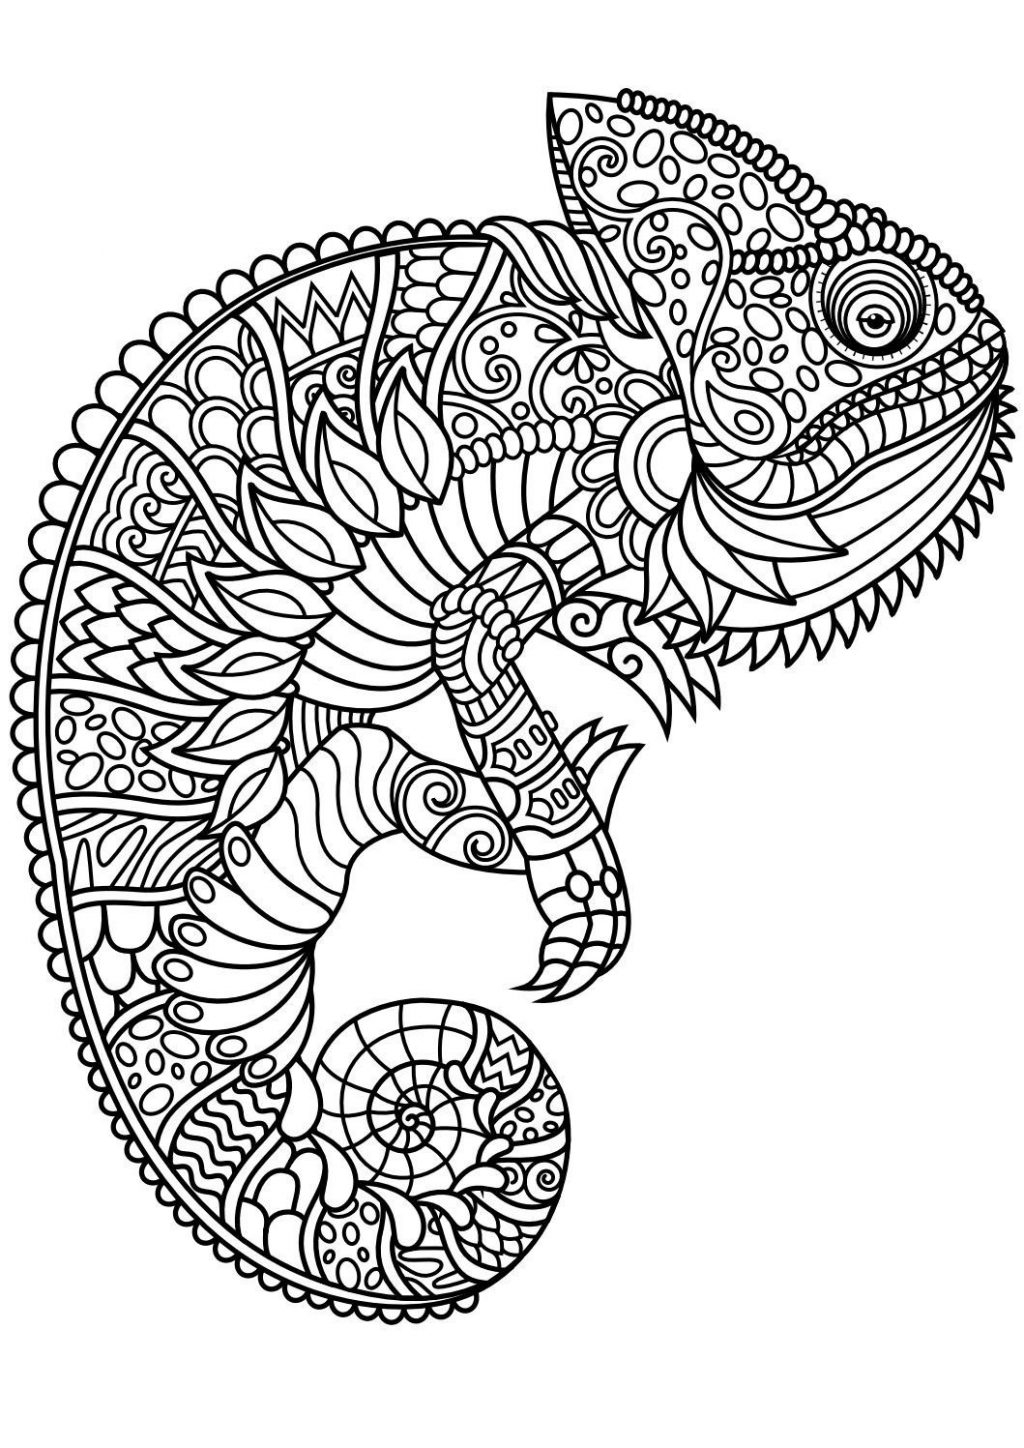 Hard Animal Coloring Pages Coloring Pages Coloring Pages Therapeutic For Adults To Print